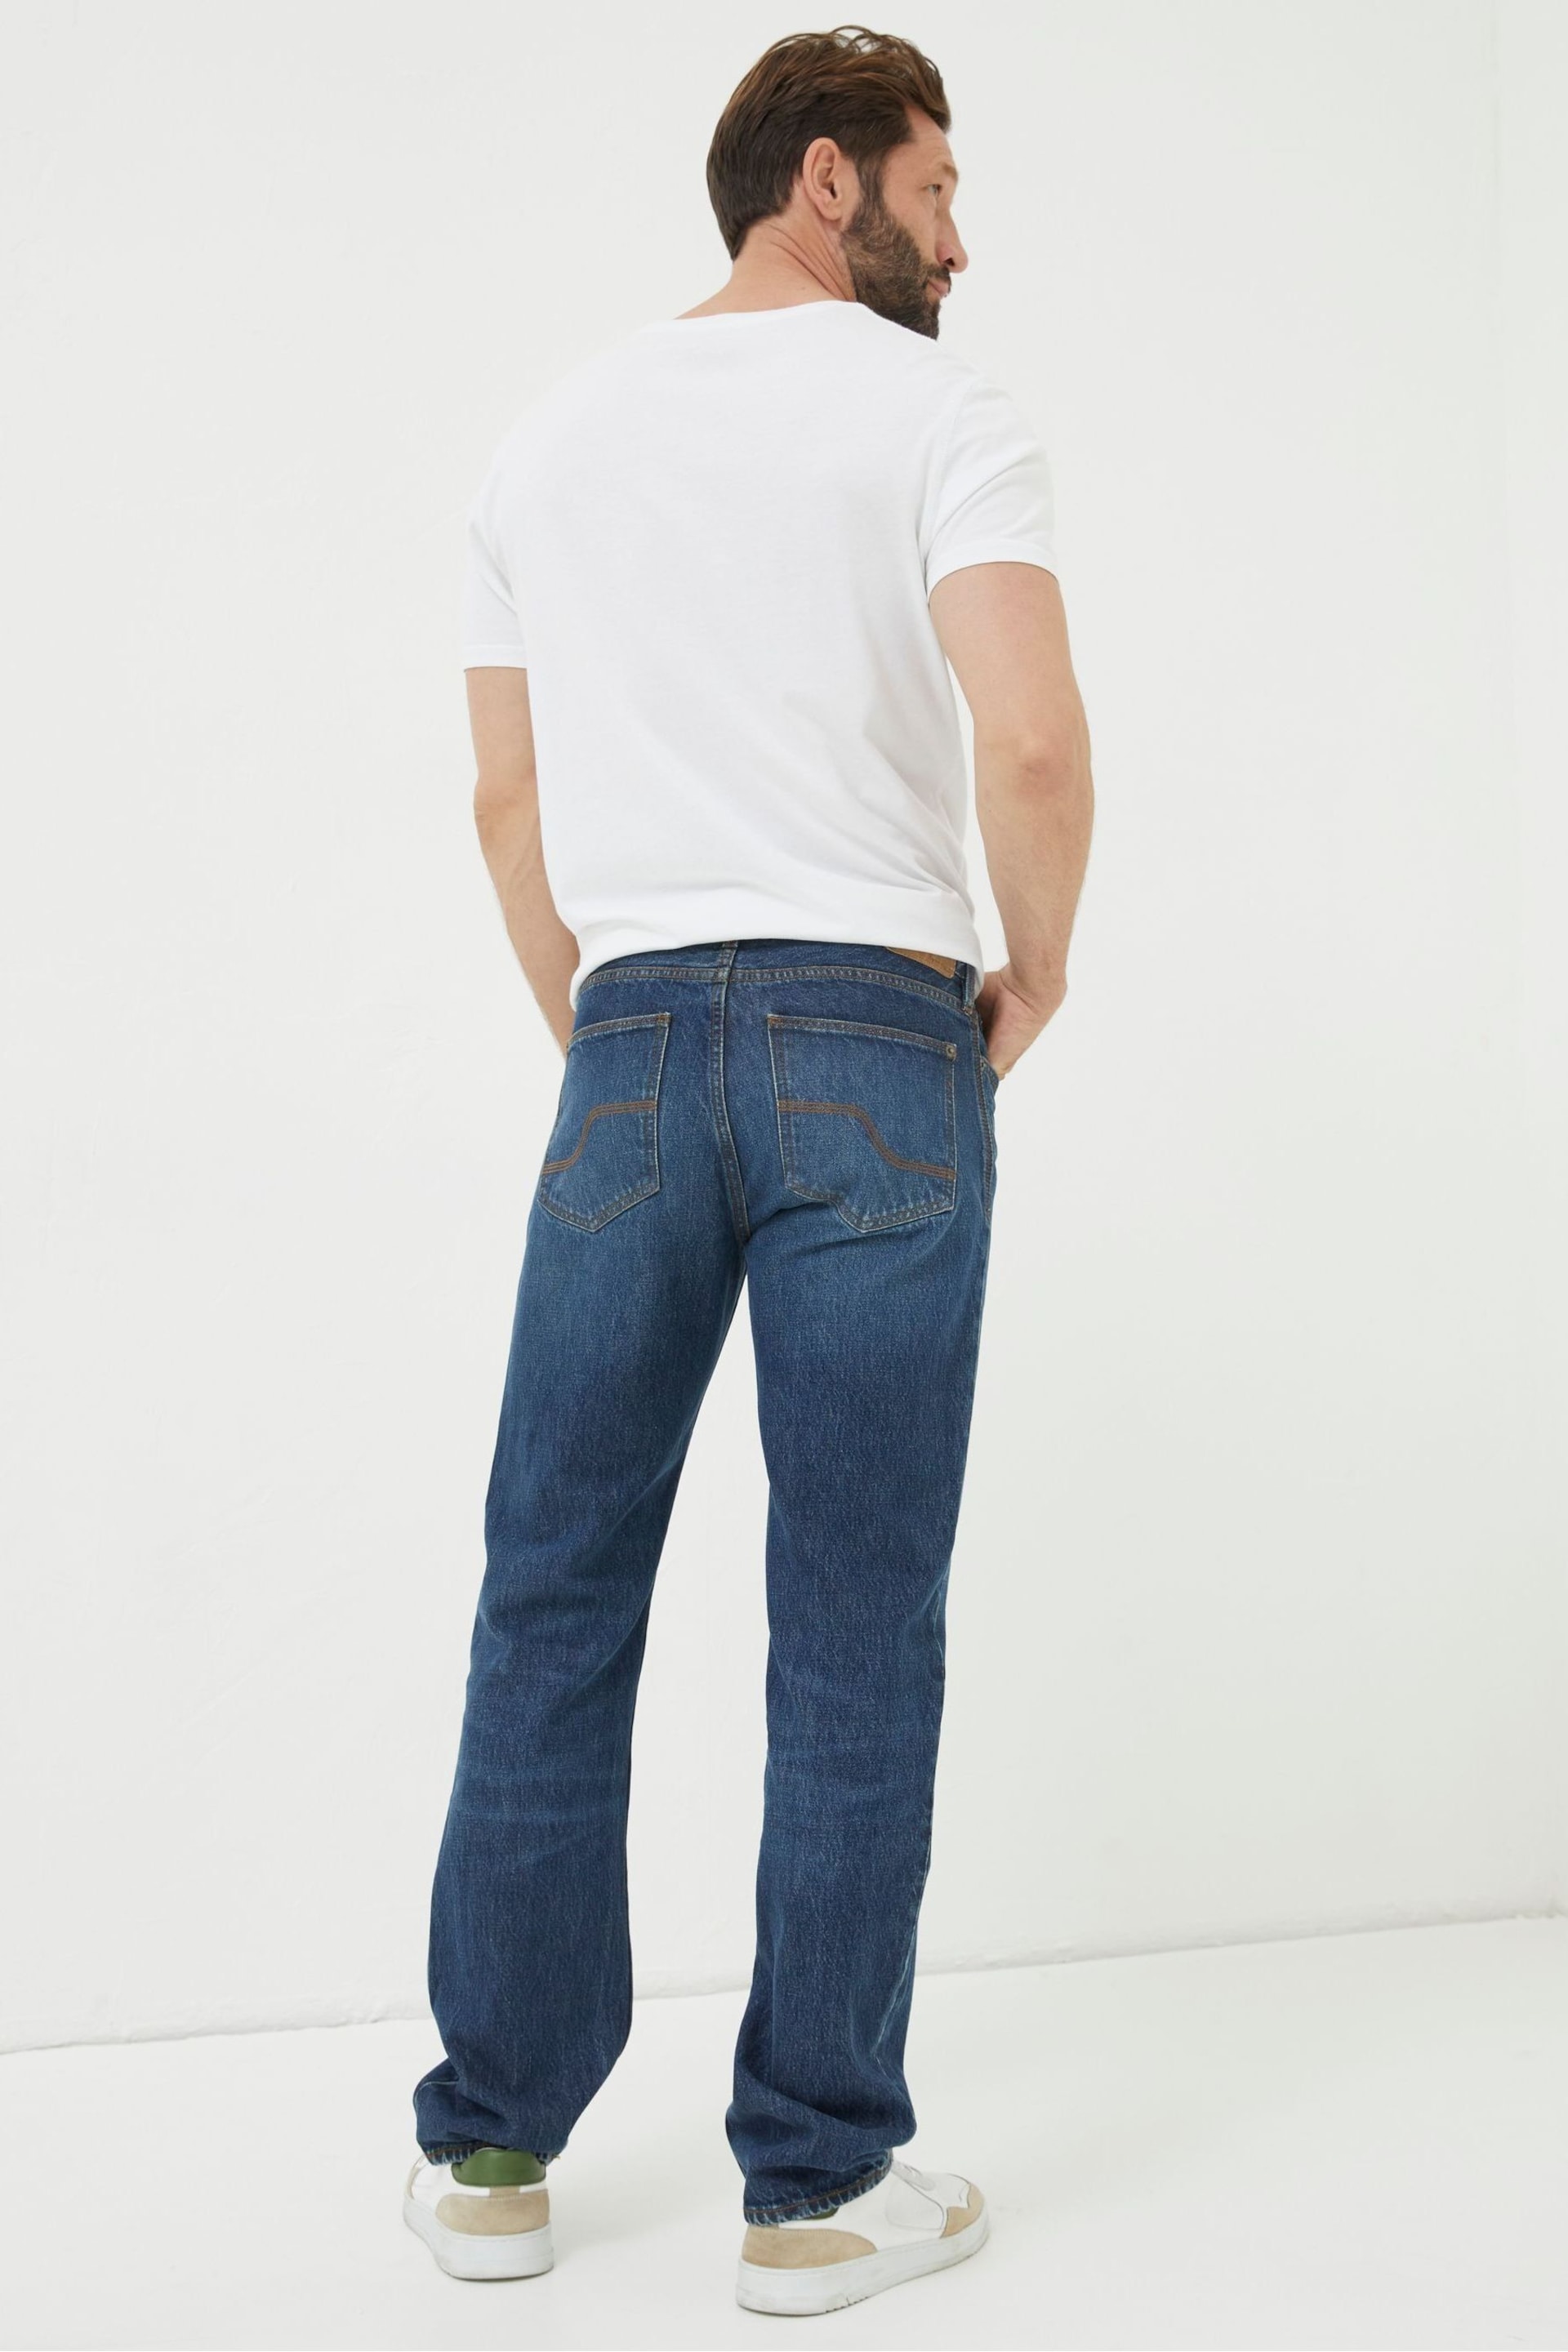 FatFace Blue Straight Fit Jeans - Image 2 of 5